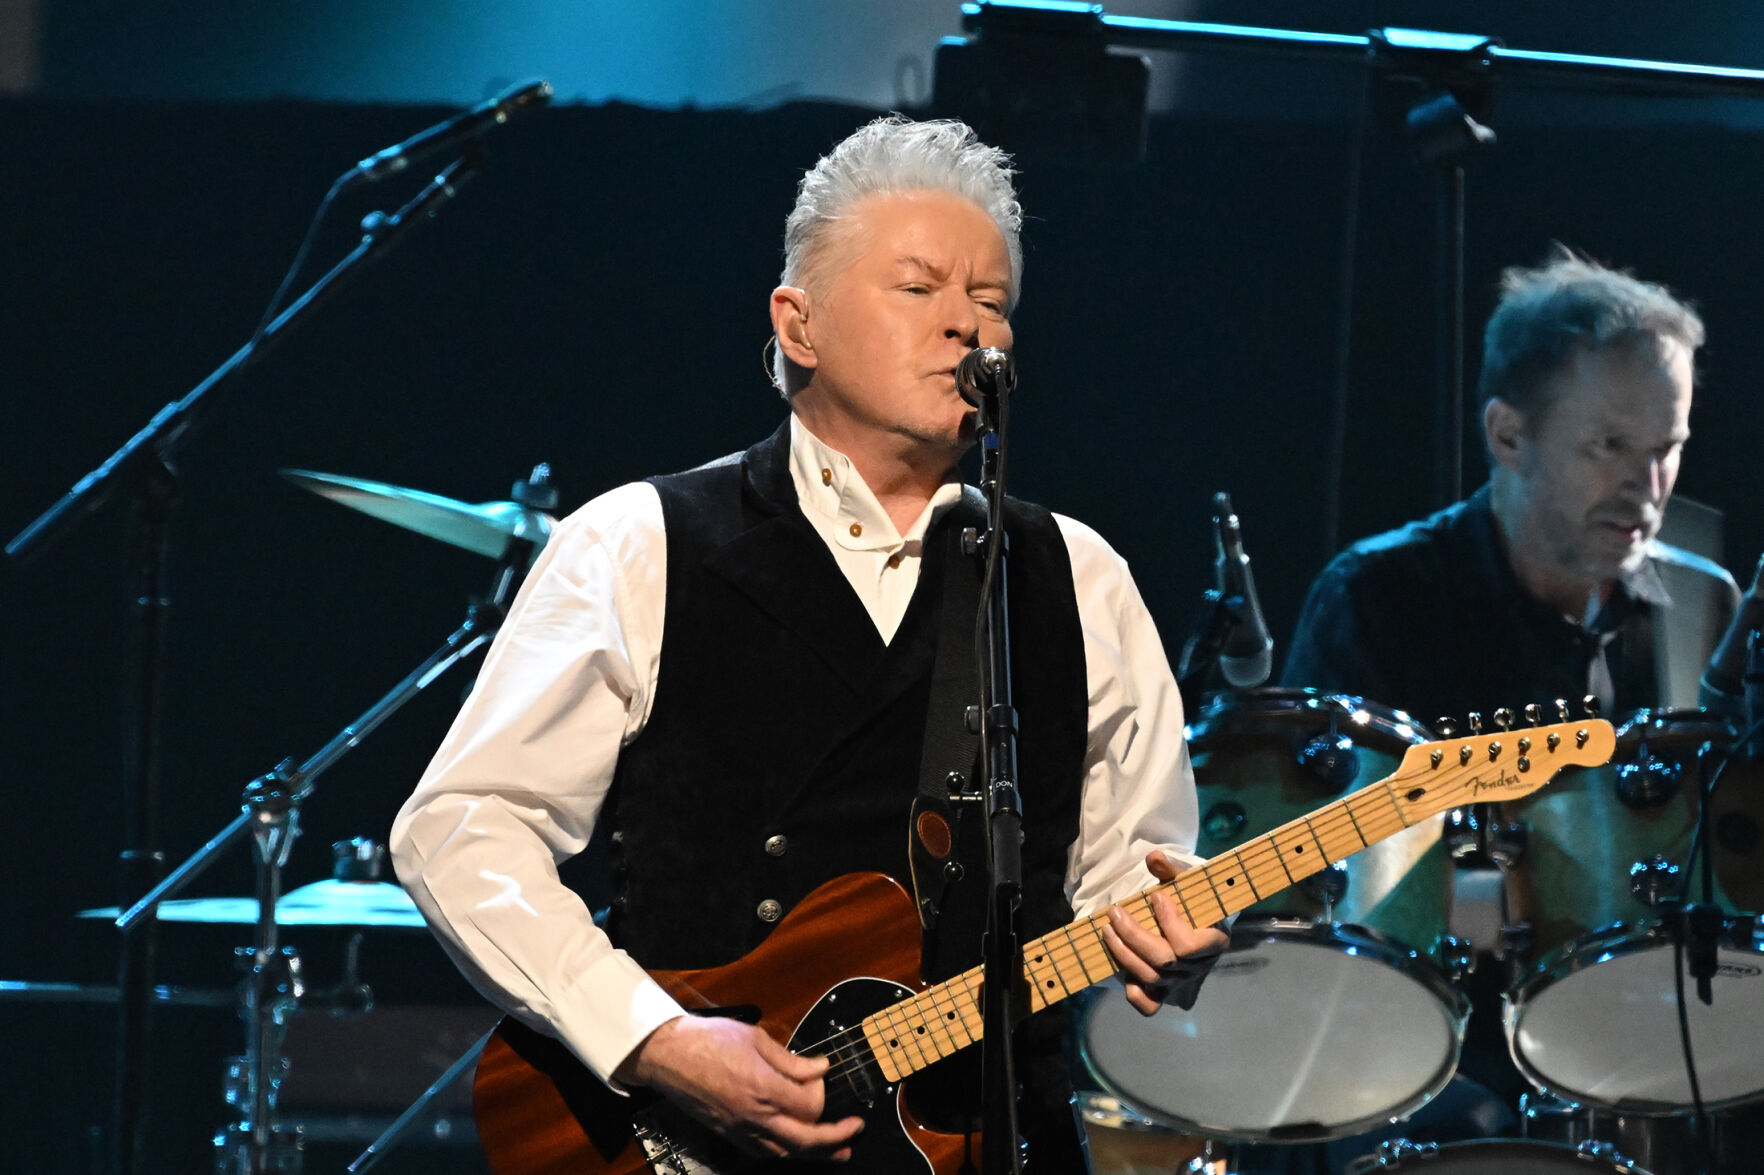 Eagles Hotel California tour dazzled at New Orleans stop | Music 